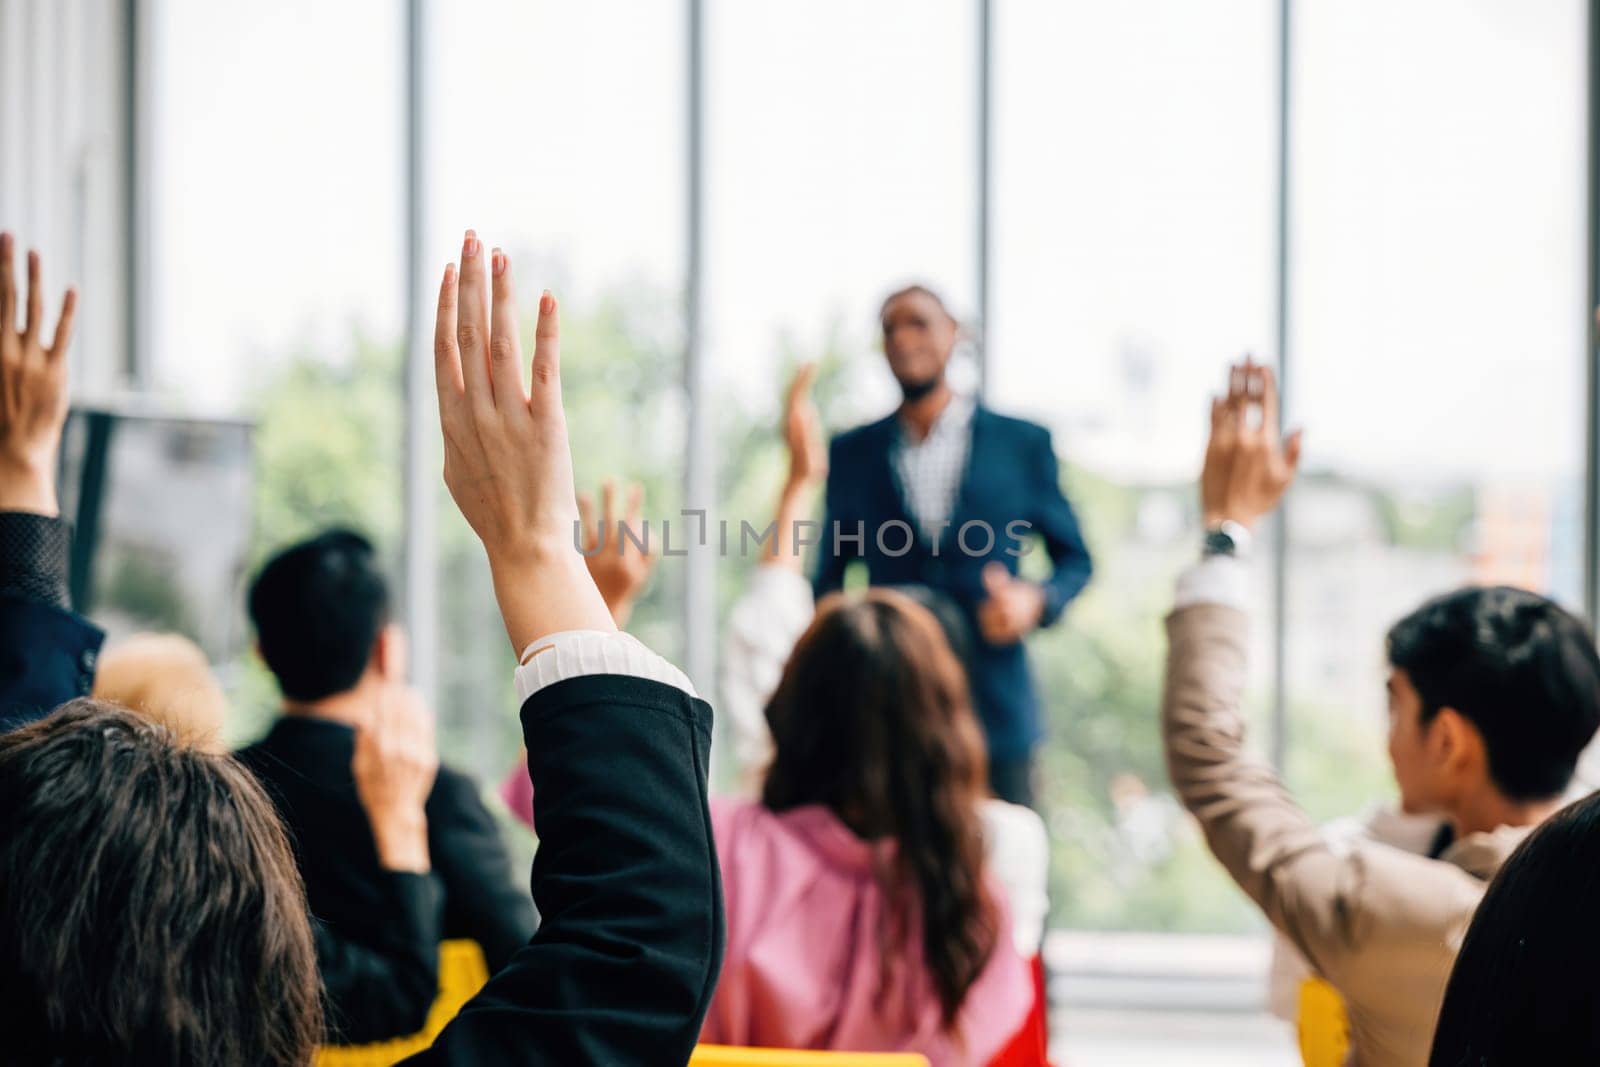 In a conference and convention at a corporate event businesspeople raise their hands to ask questions and vote. The meeting training seminar and discussions emphasize teamwork and collaboration. by Sorapop